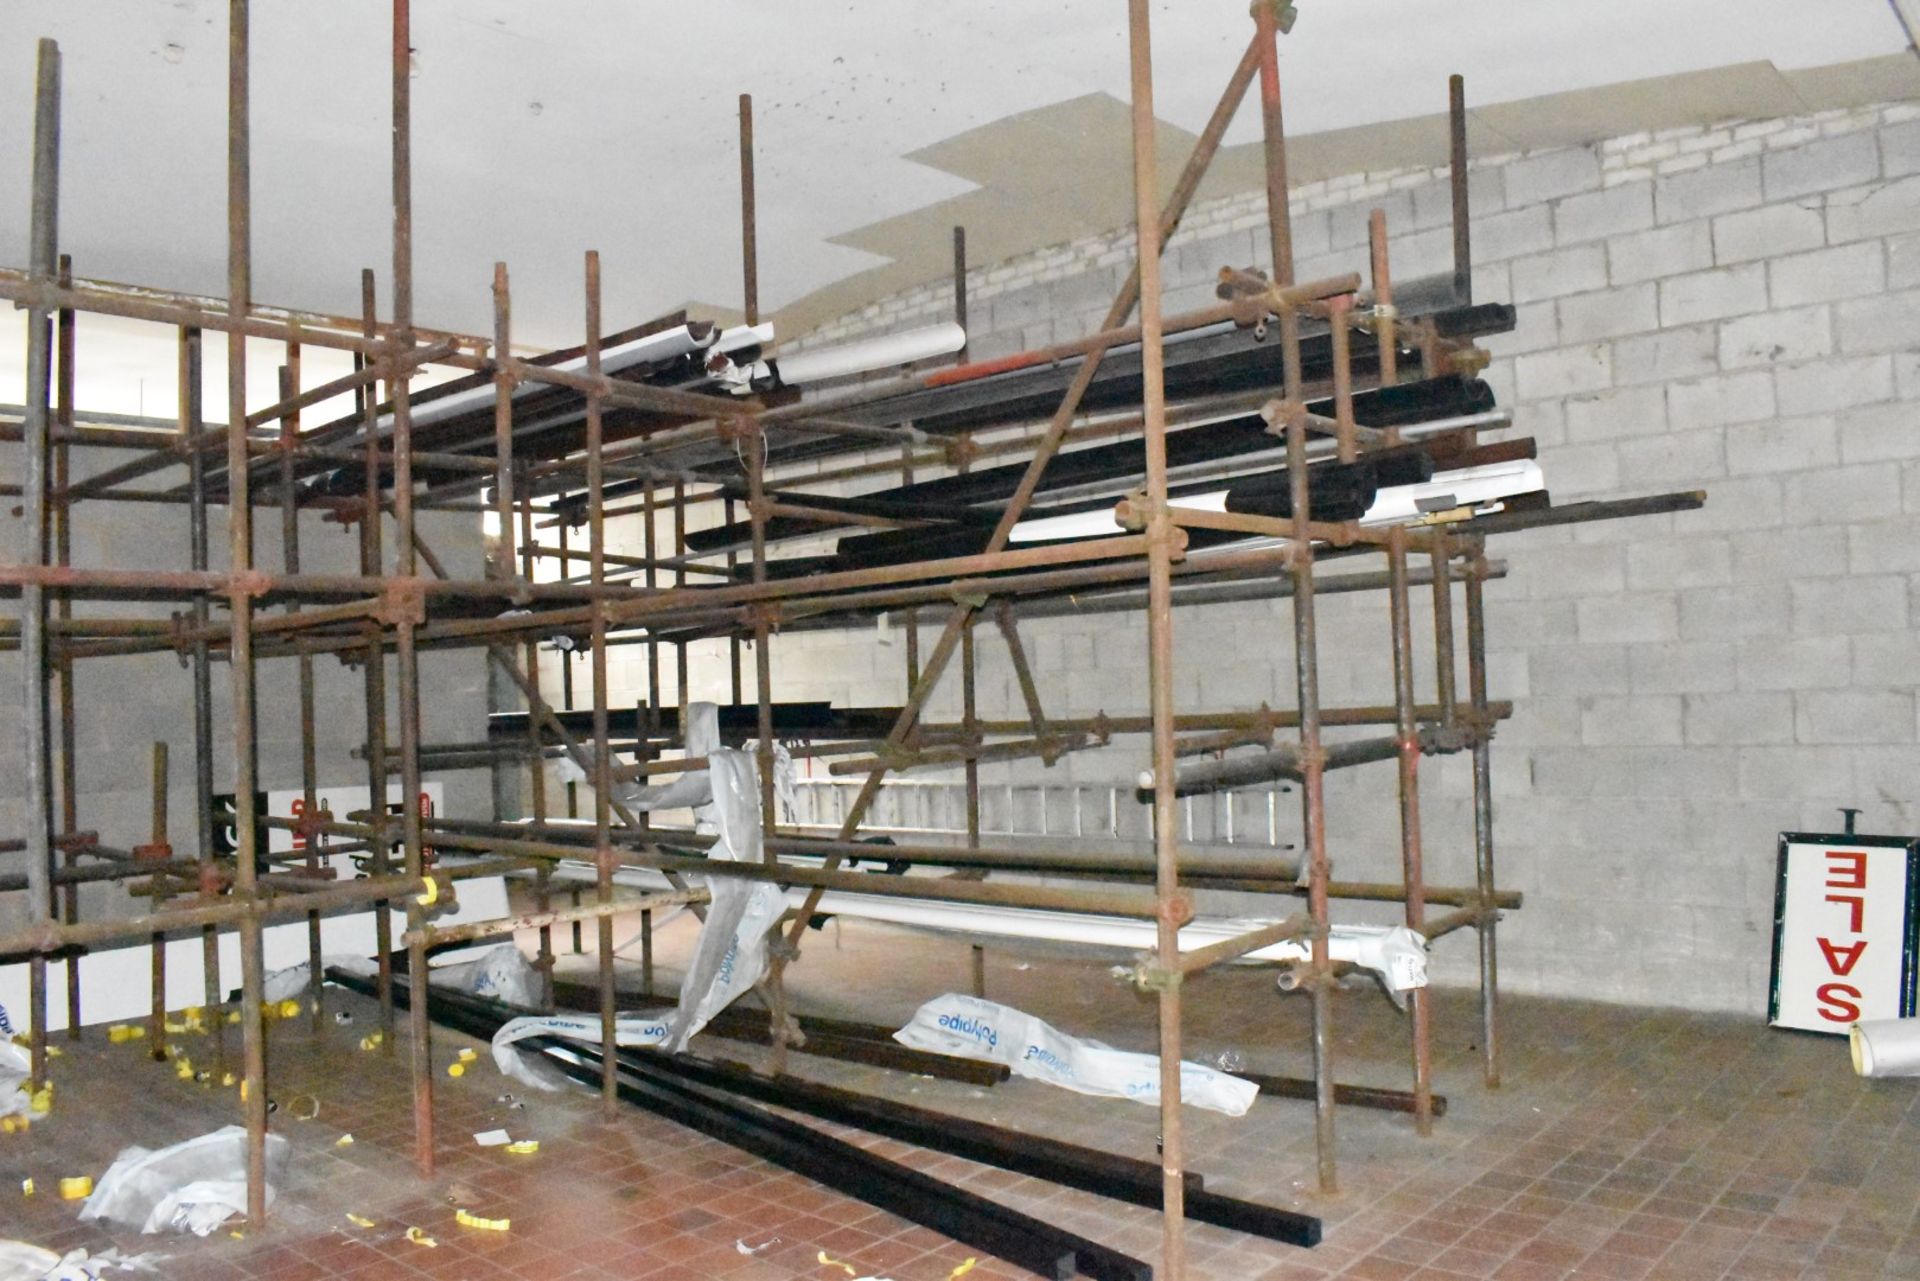 1 x Large Collection of Scaffolding and Fixtures Covering a Floor Space of Approx 13 x 13ft - Image 15 of 15